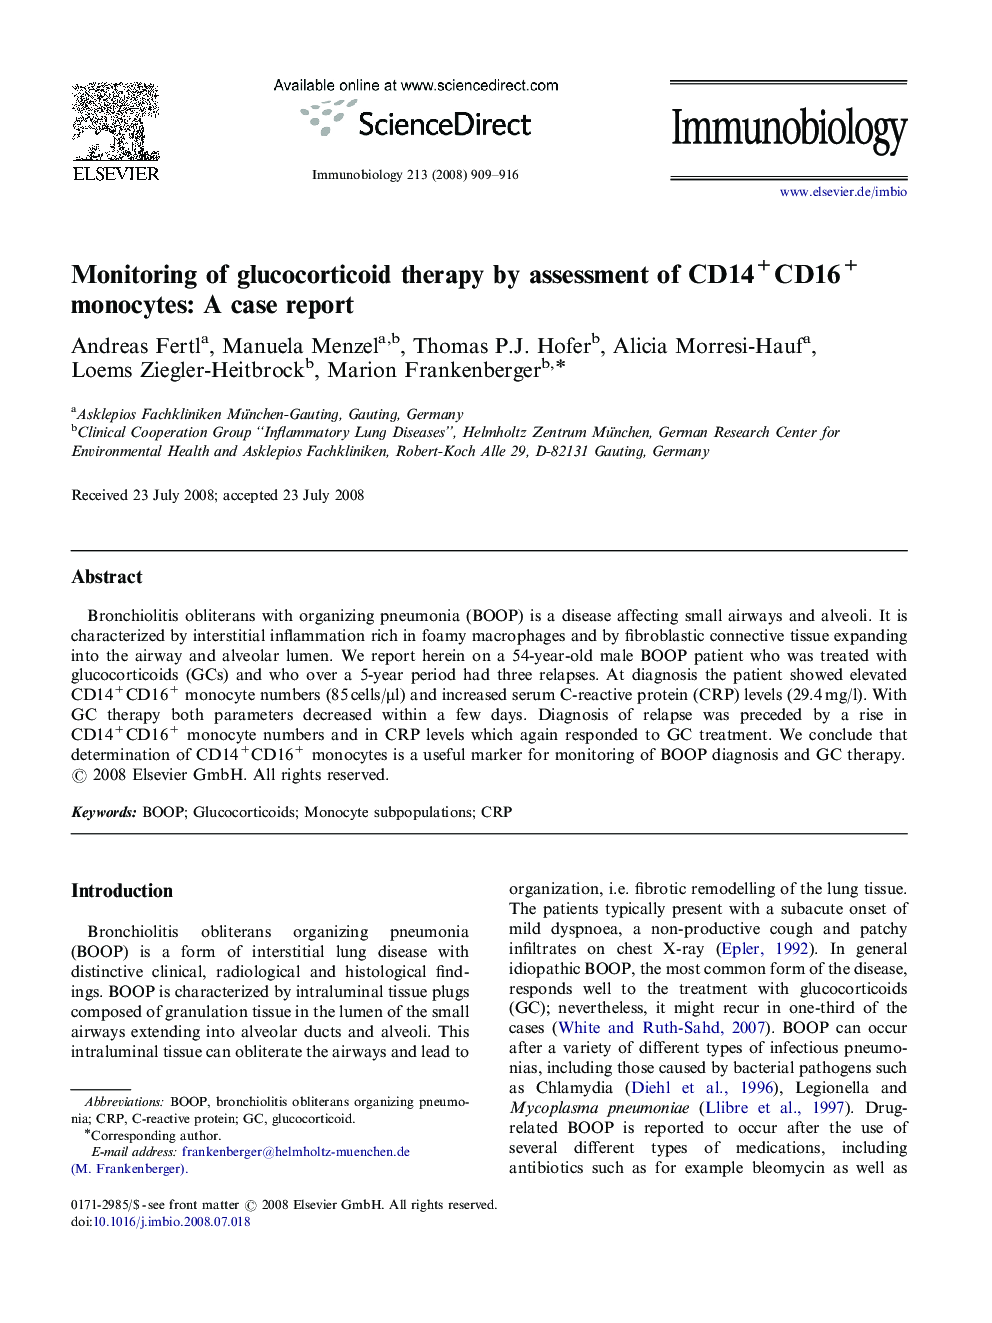 Monitoring of glucocorticoid therapy by assessment of CD14+CD16+ monocytes: A case report